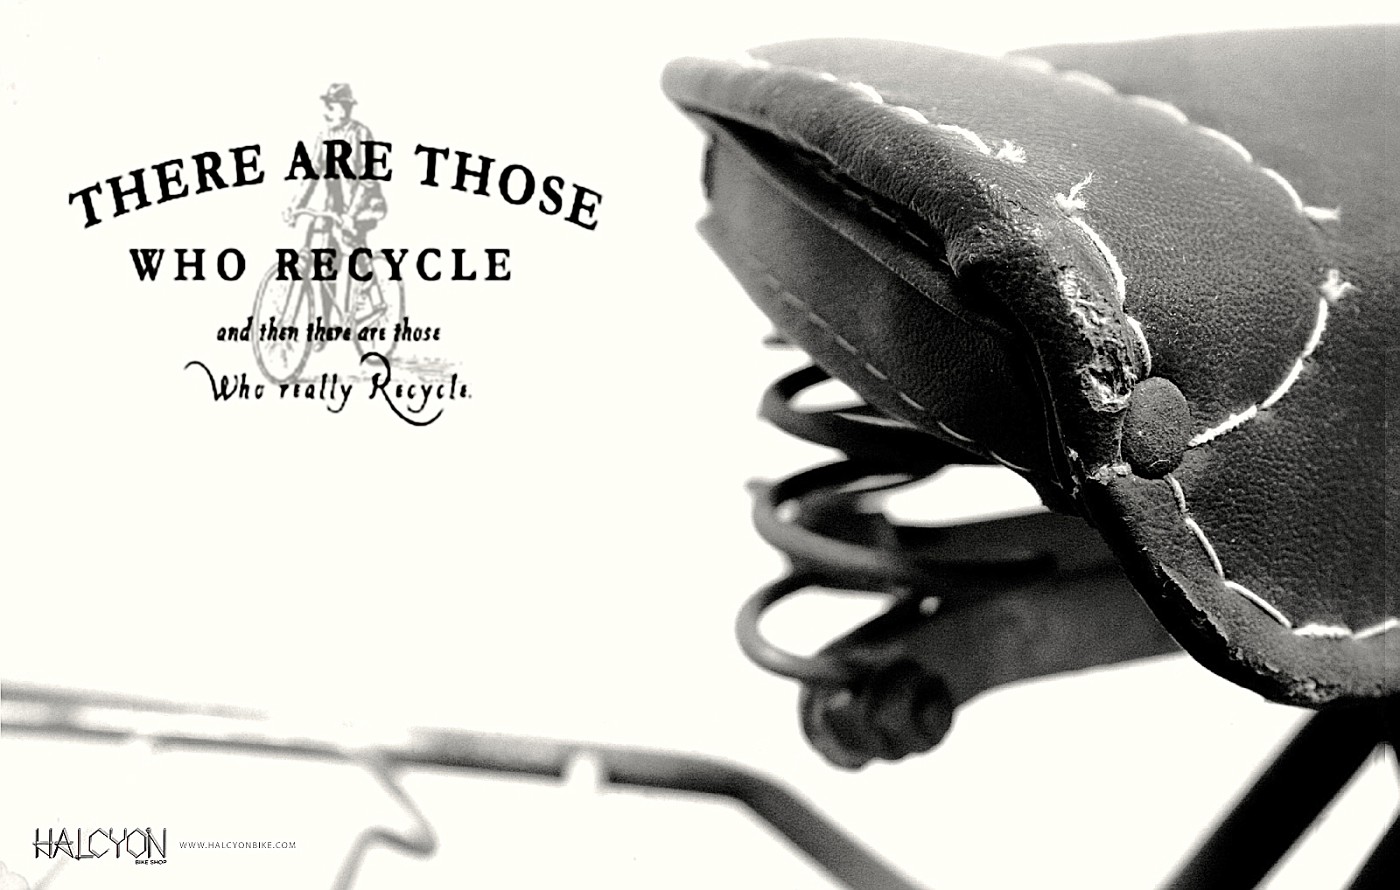 There are those who recycle ...